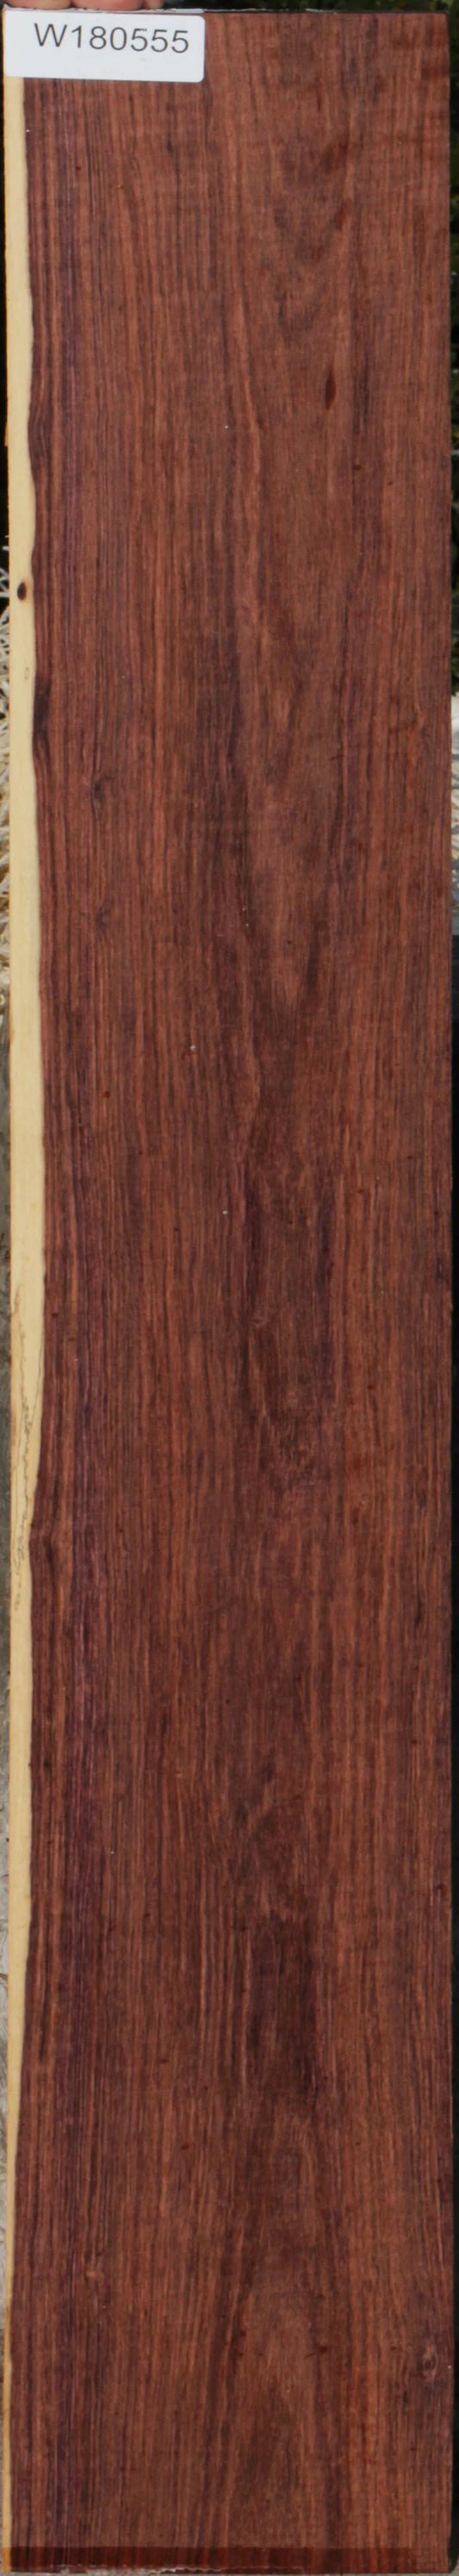 Extra Fancy Spalted Madagascar Rosewood Lumber